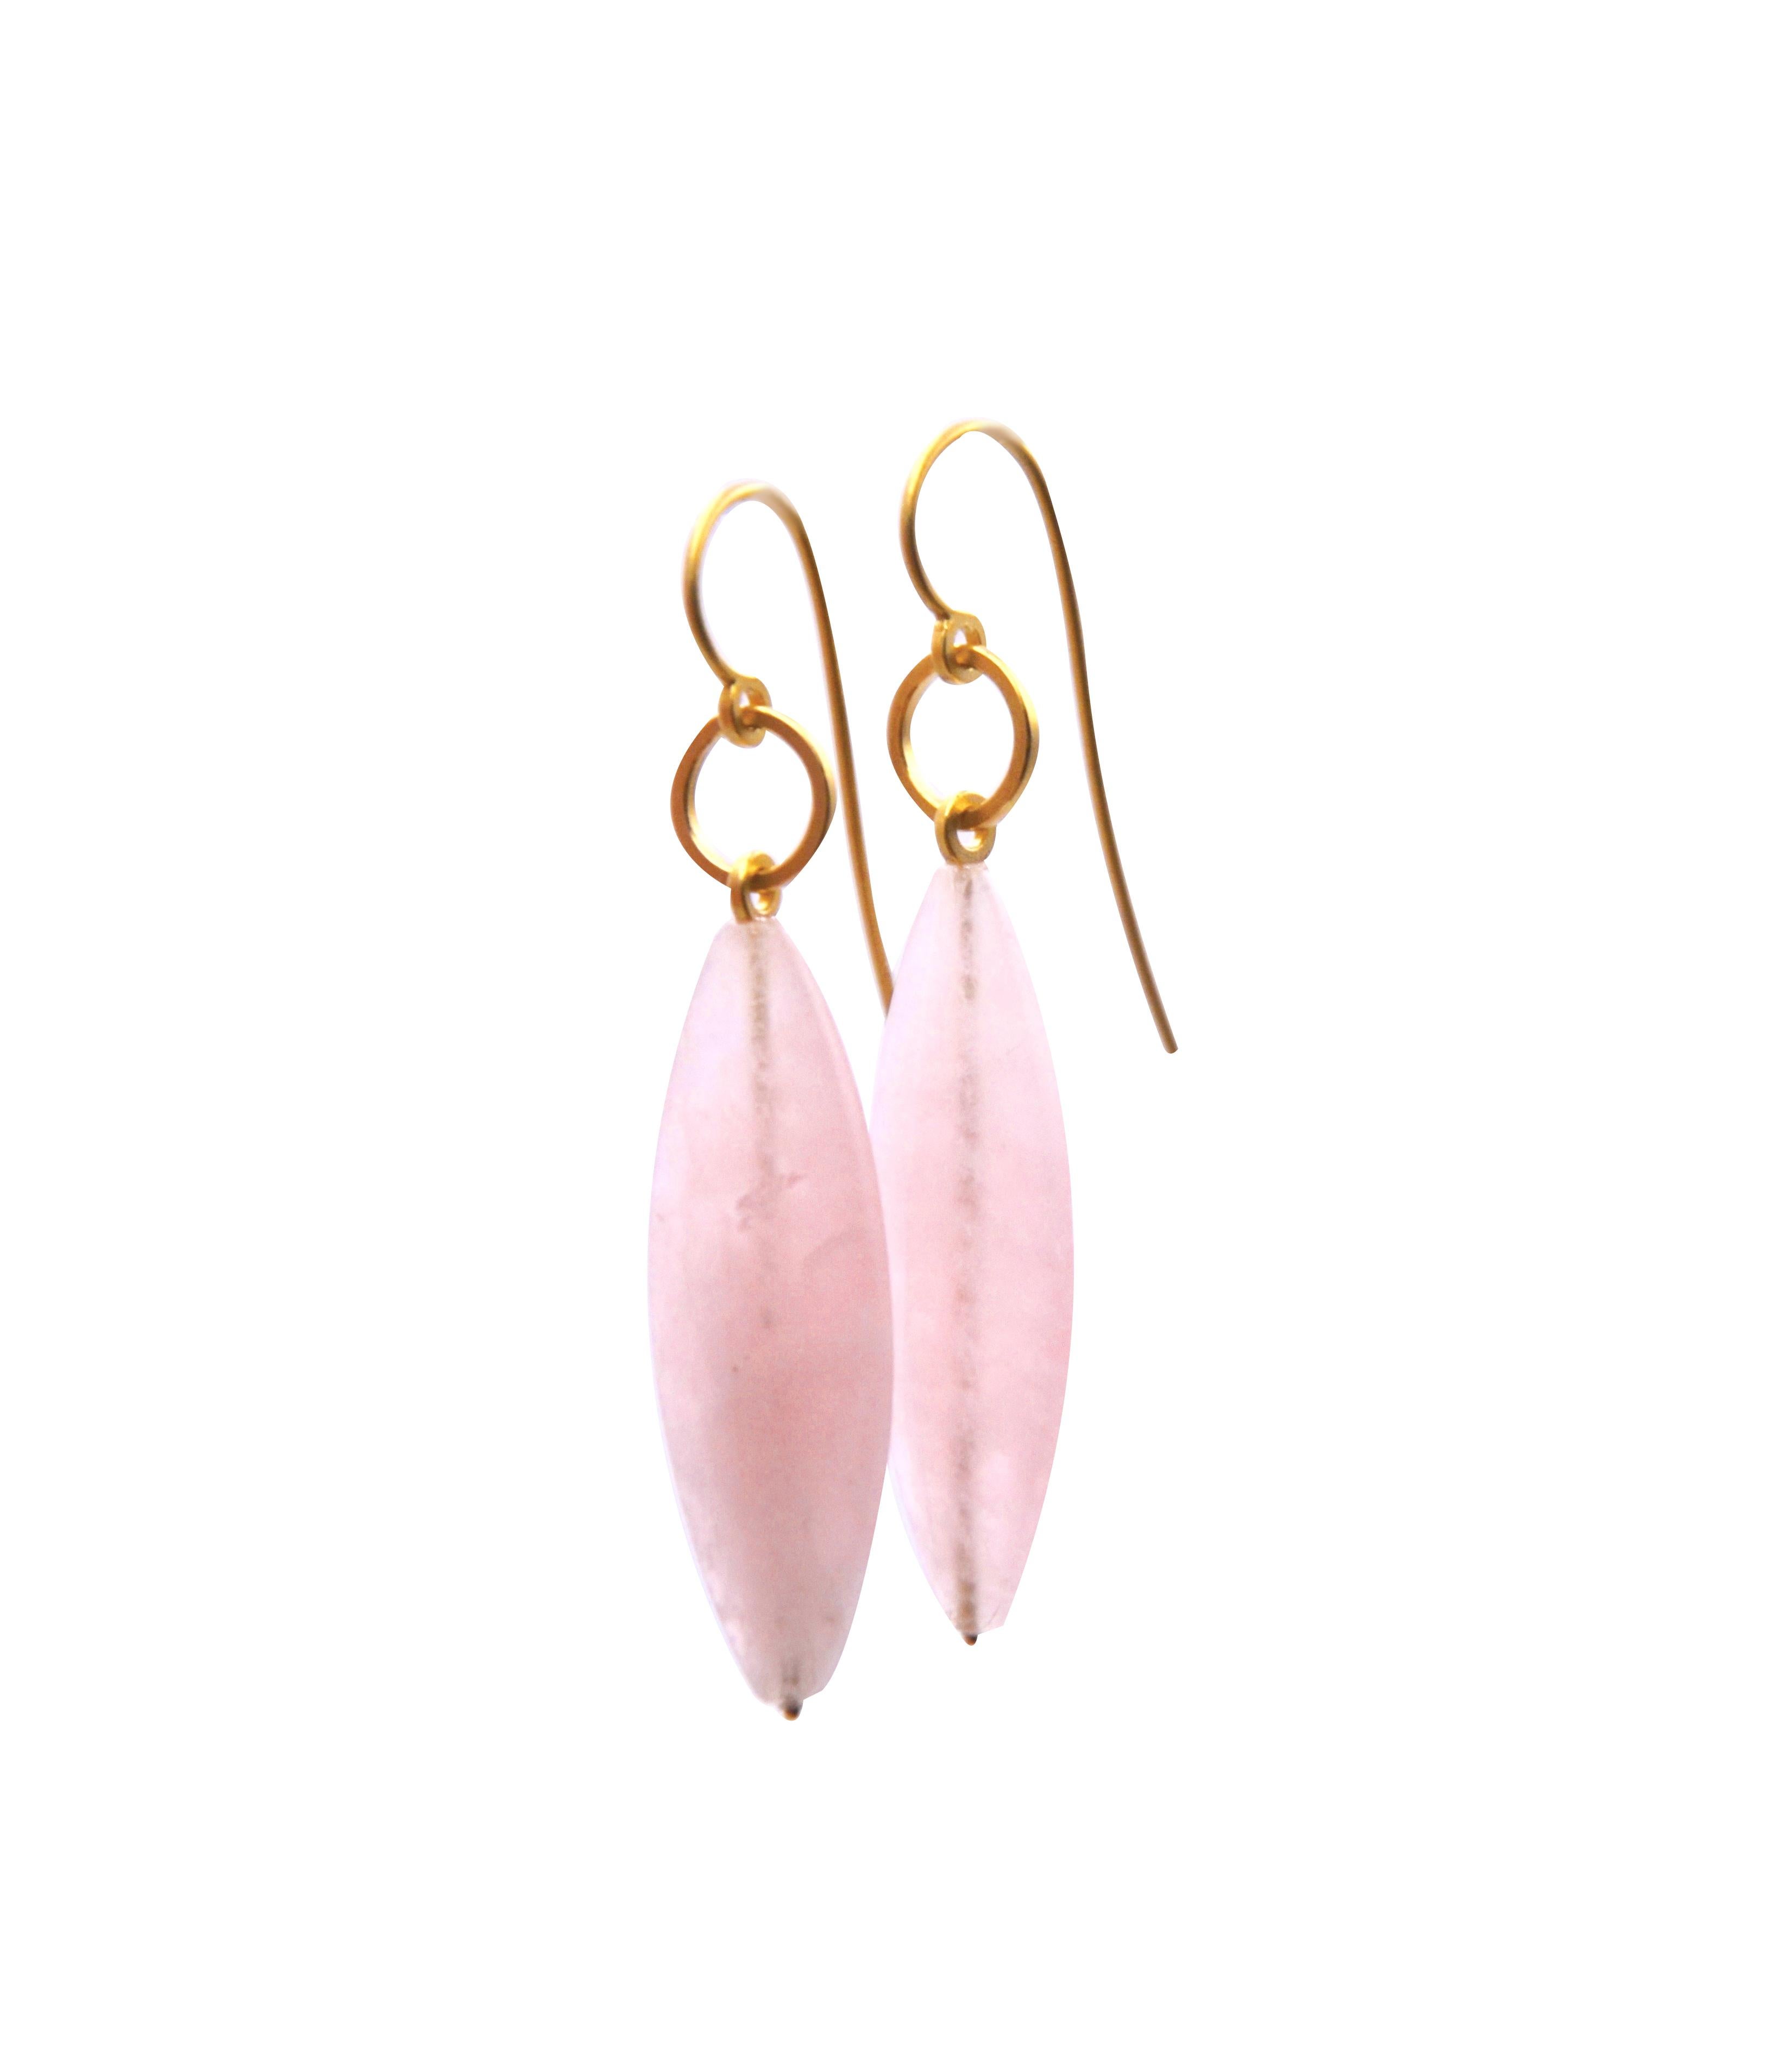 Marquise Cut Contemporary 18 Karat Gold Earrings with Rose Quartz For Sale